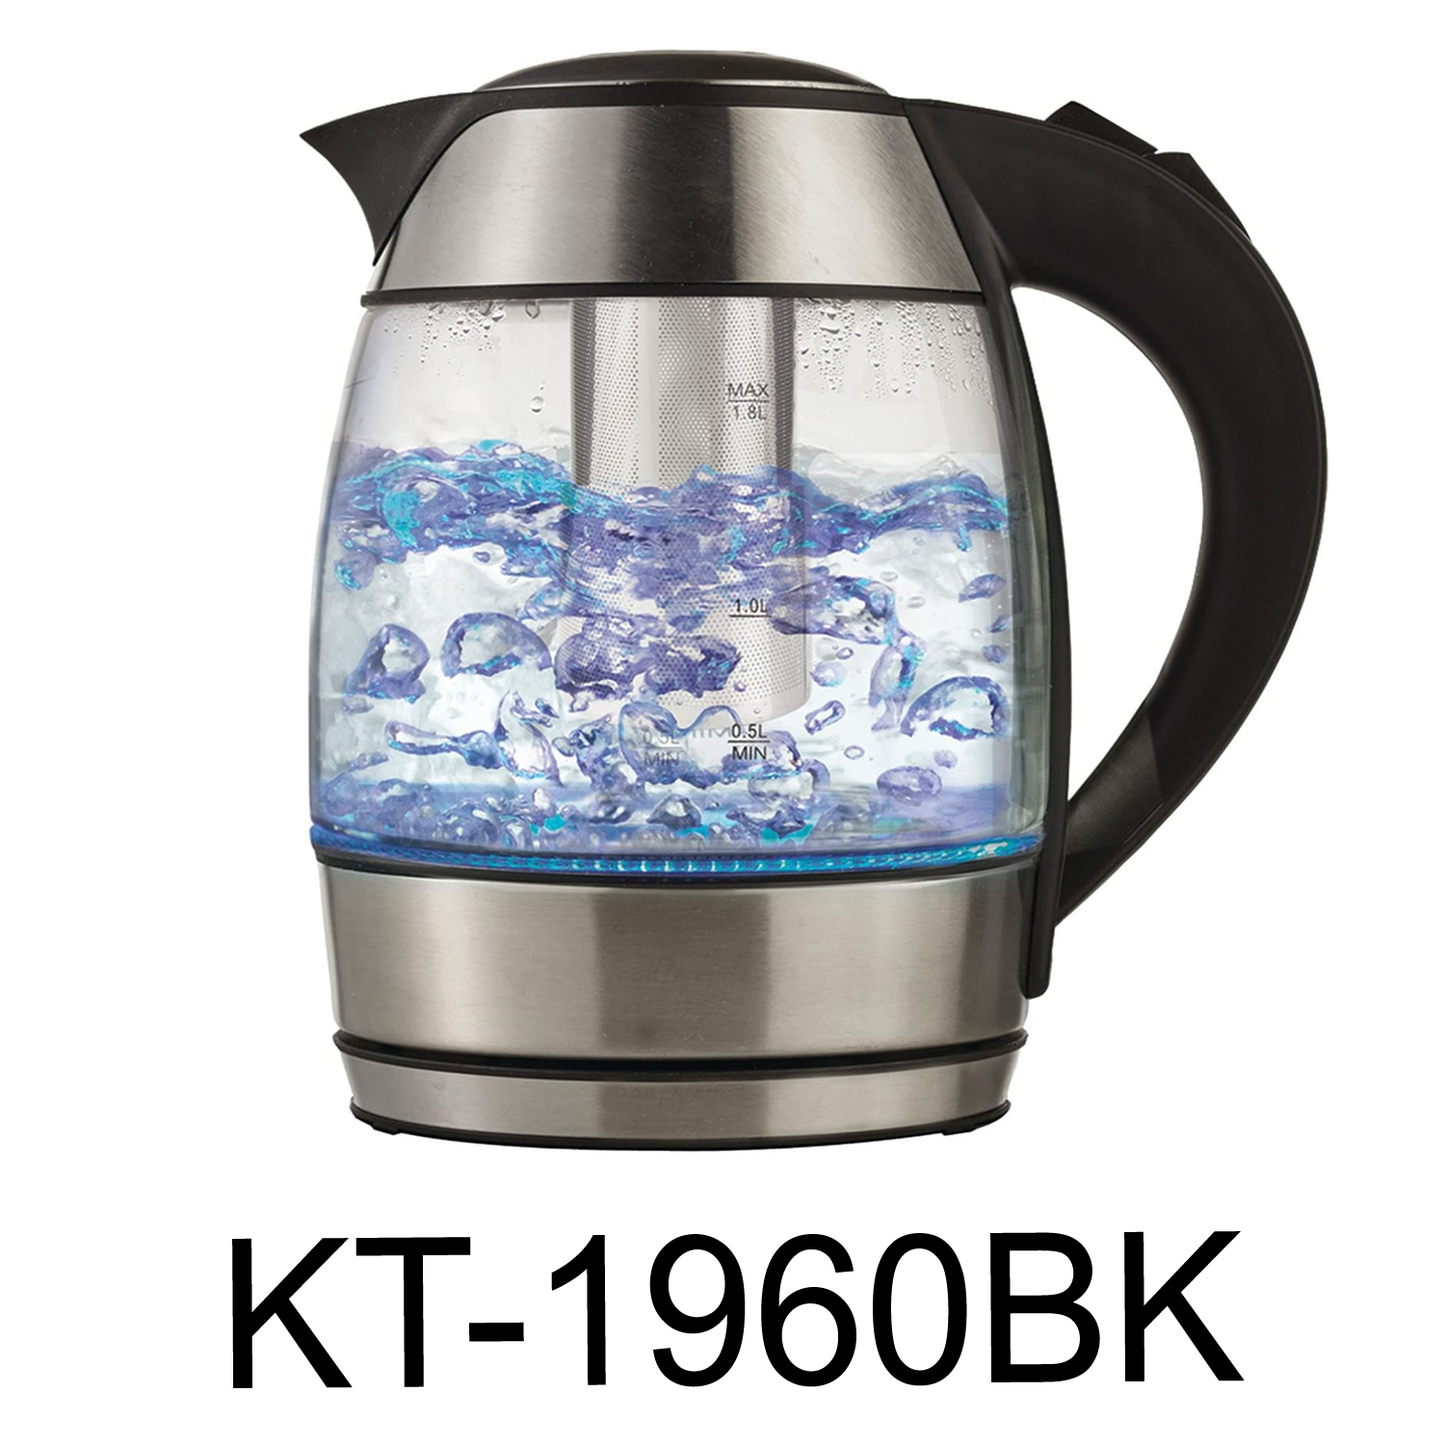 Brentwood 1.7L Tempered Glass Tea Kettle in White 